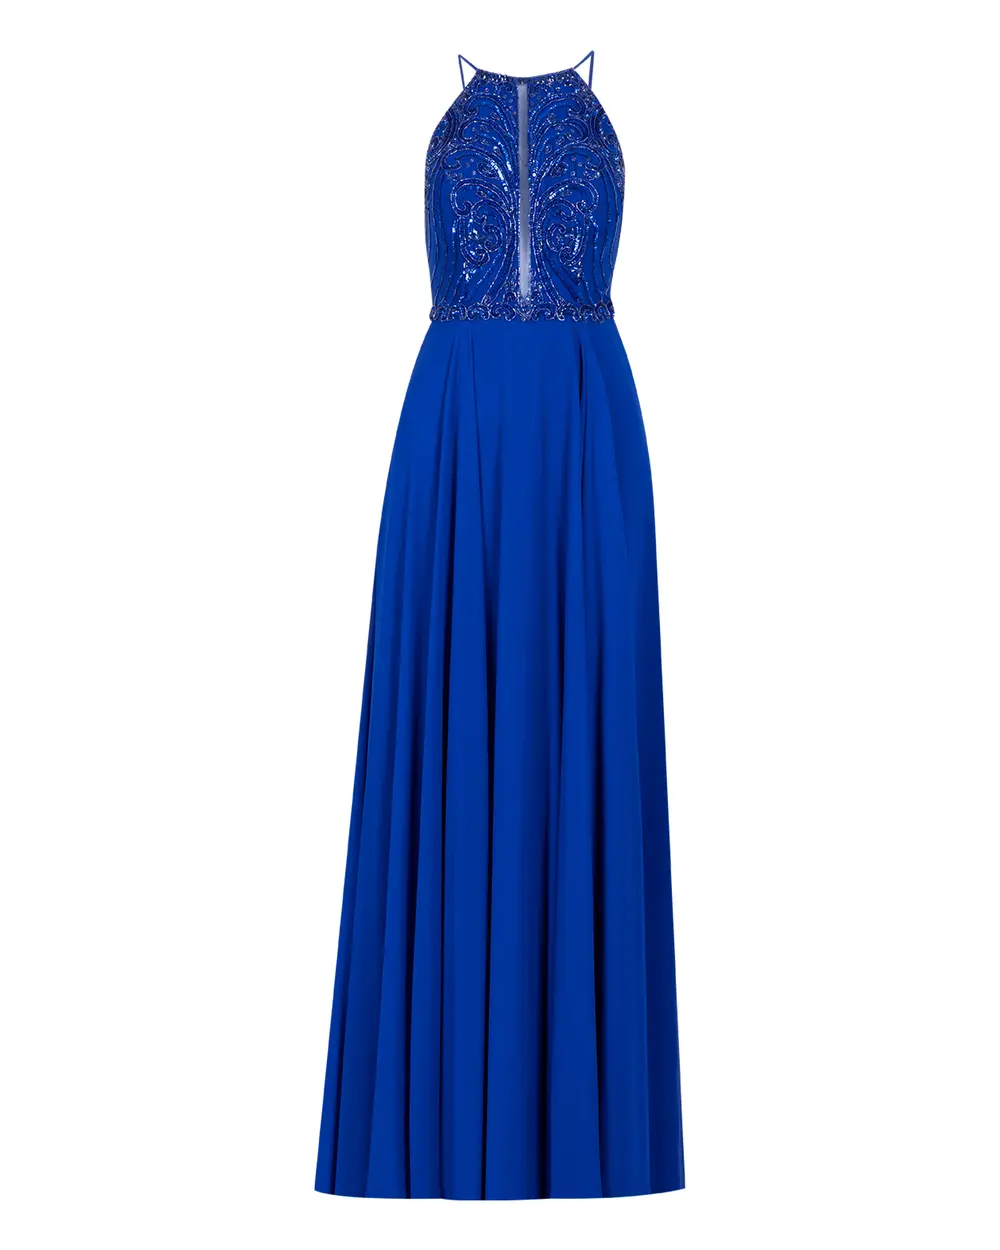 Slitted Indian Accesoried Evening Dress